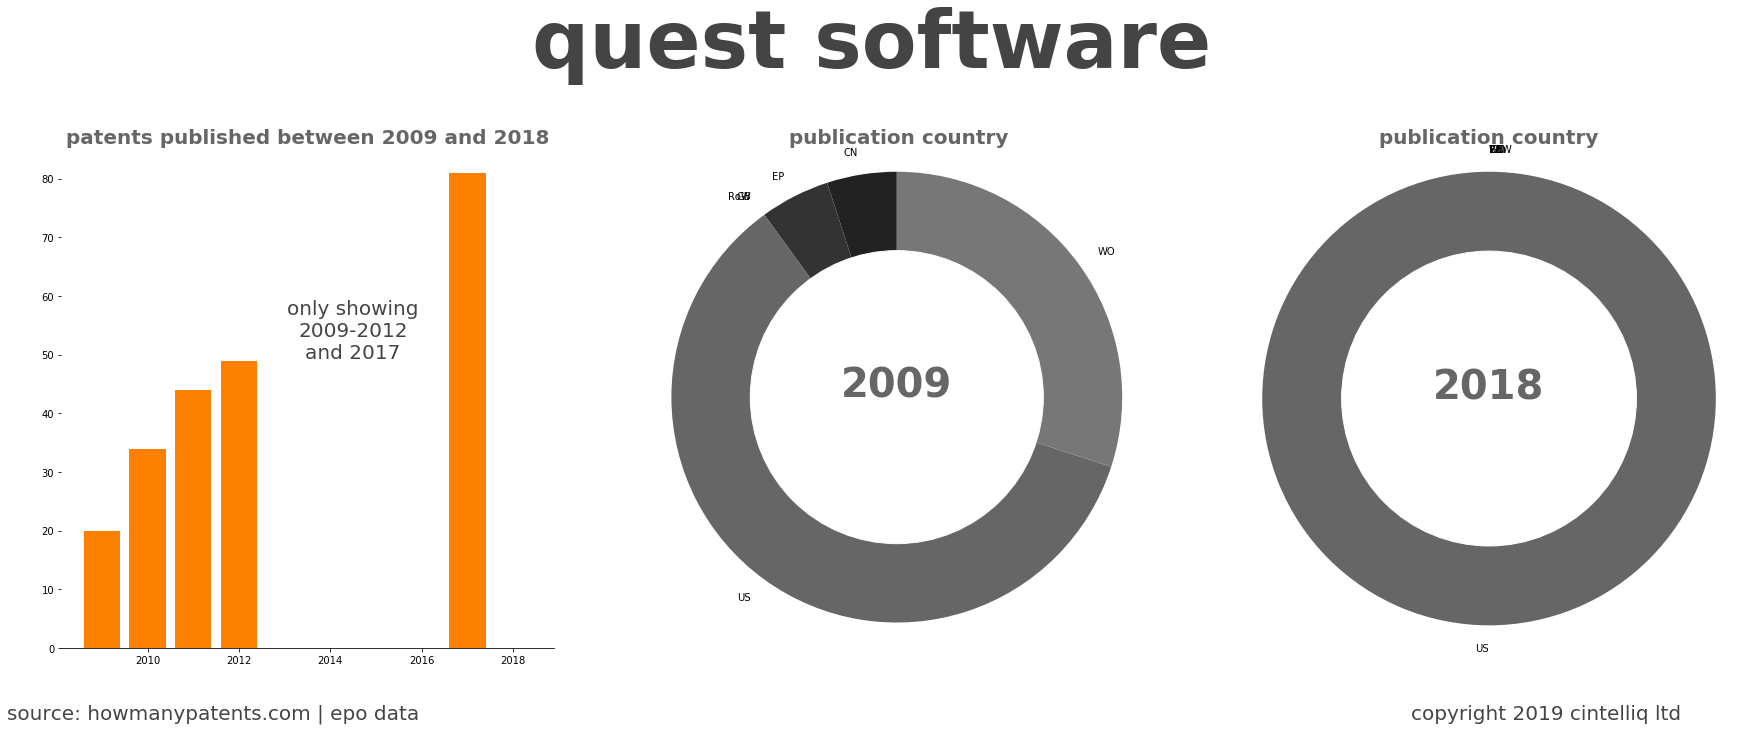 summary of patents for Quest Software